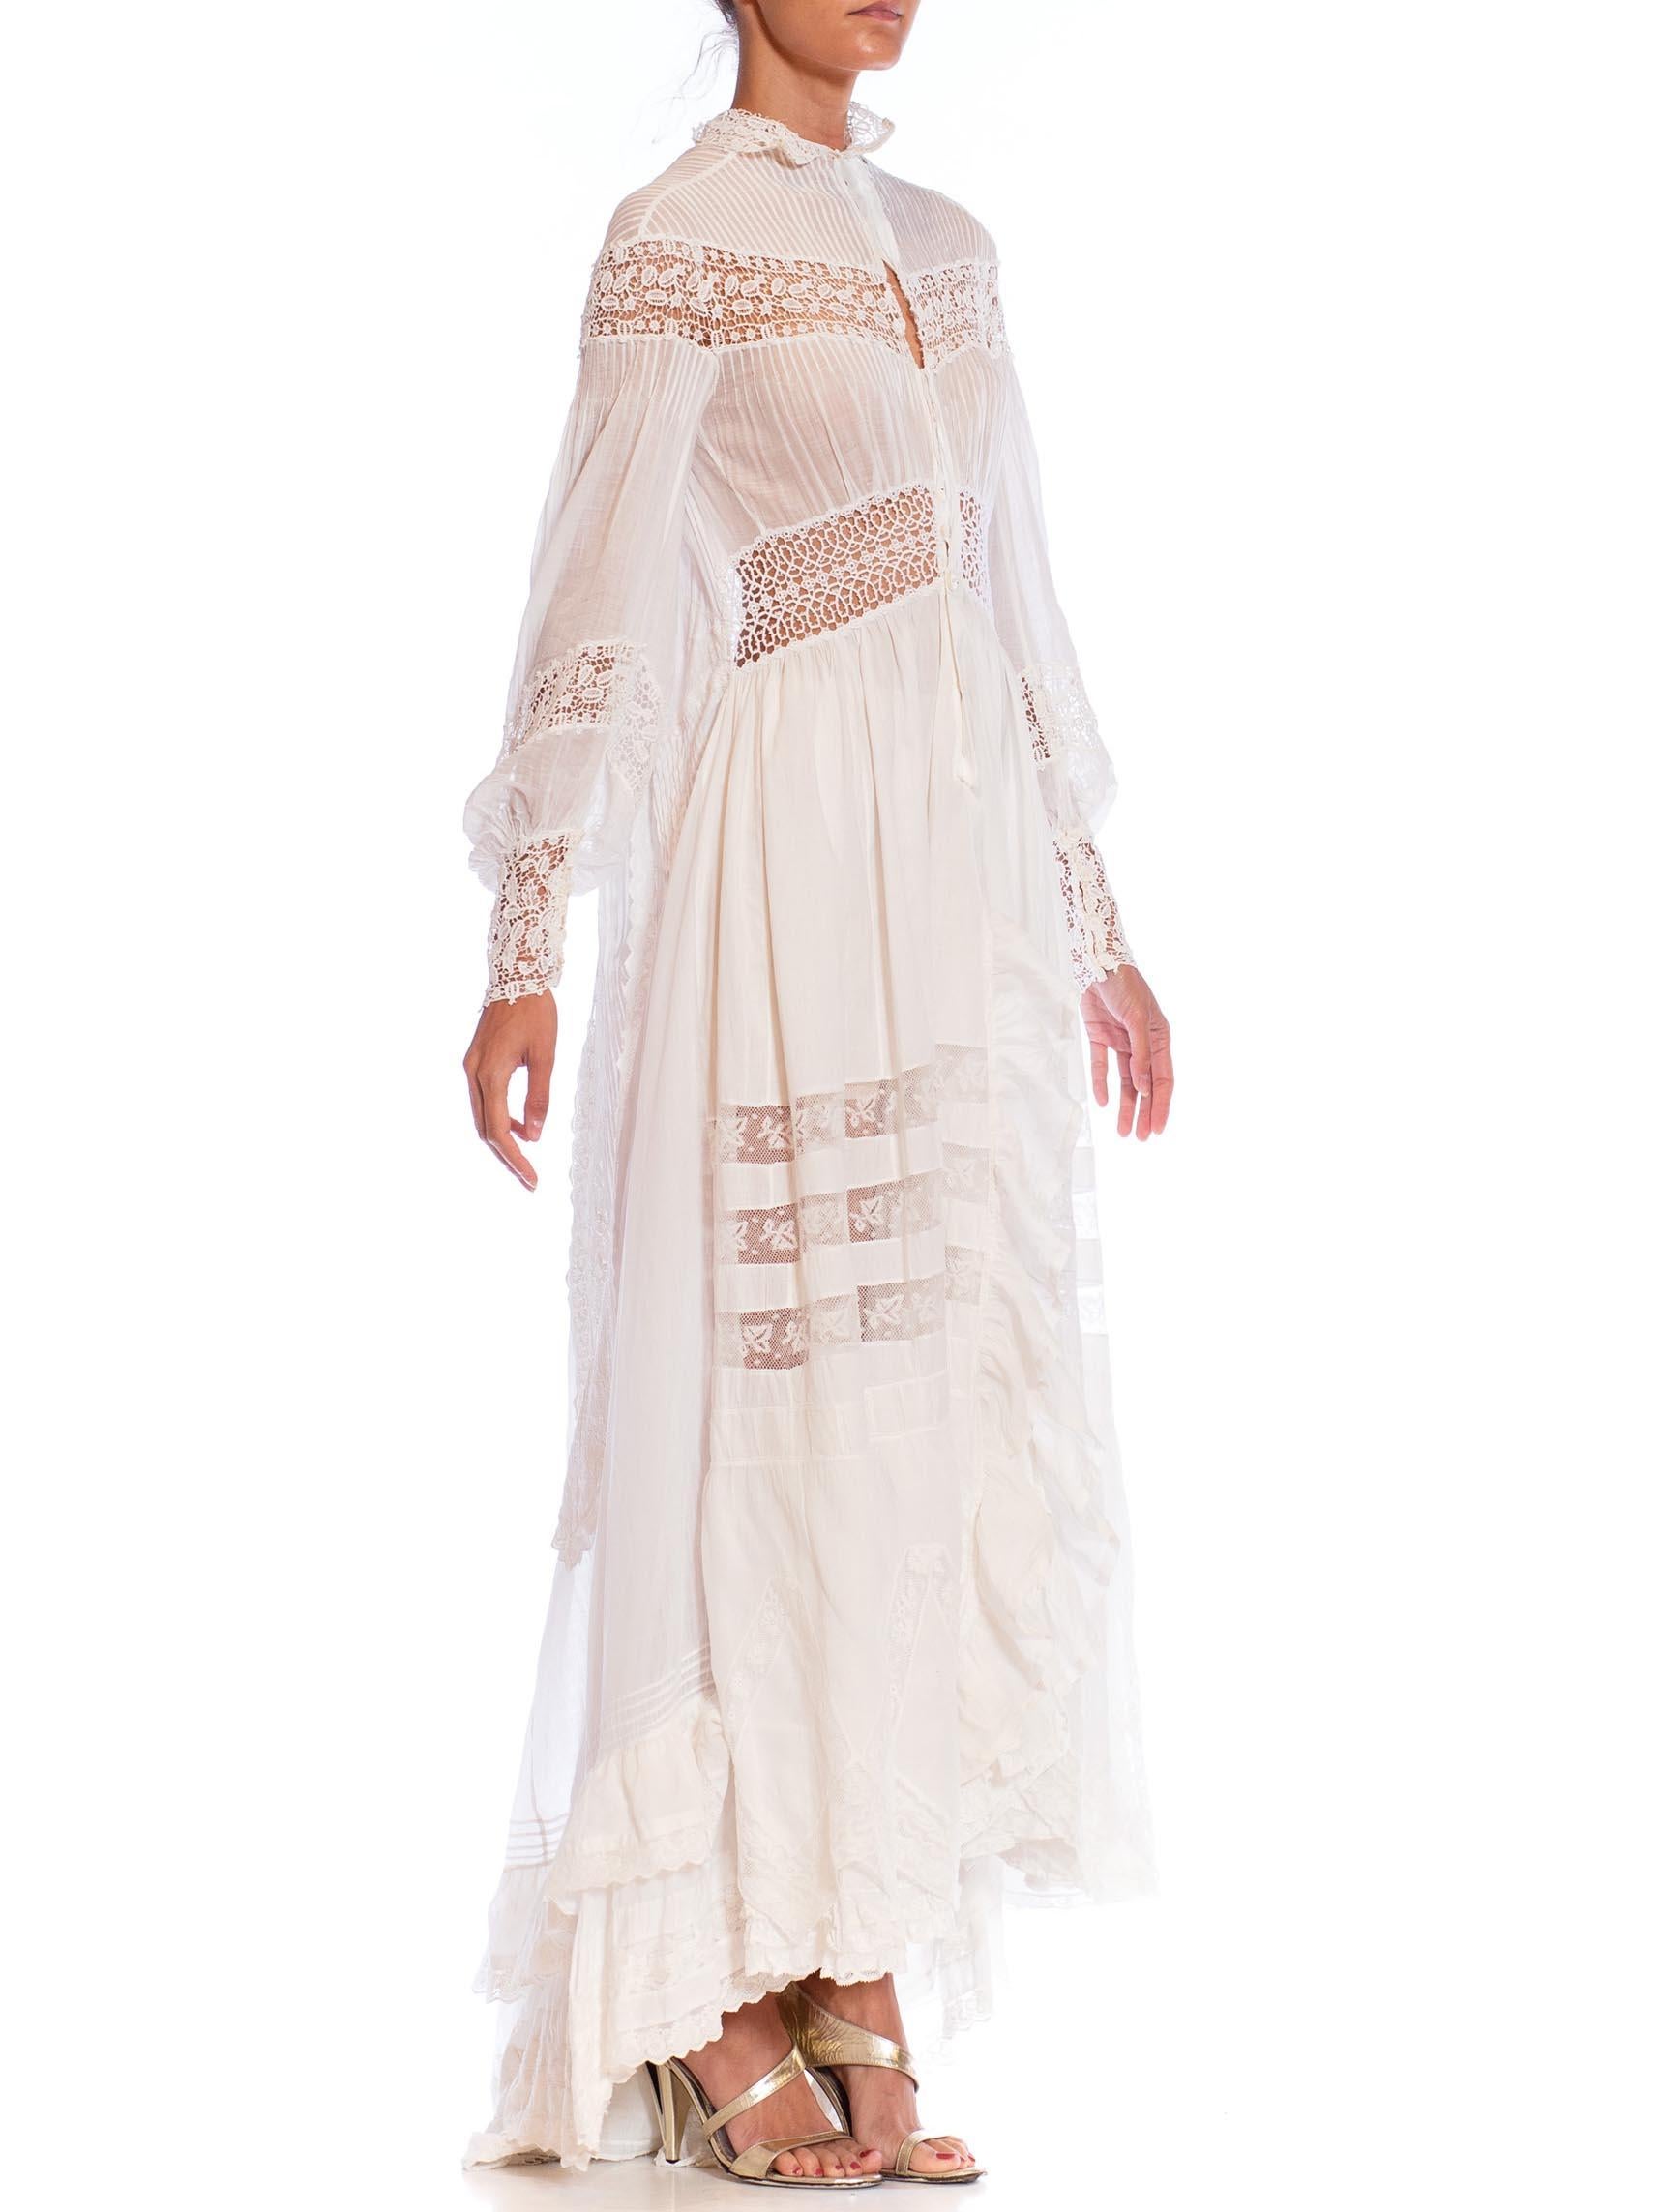 Morphew Atelier White Victorian Cotton & Lace Oversized Gown For Sale 1